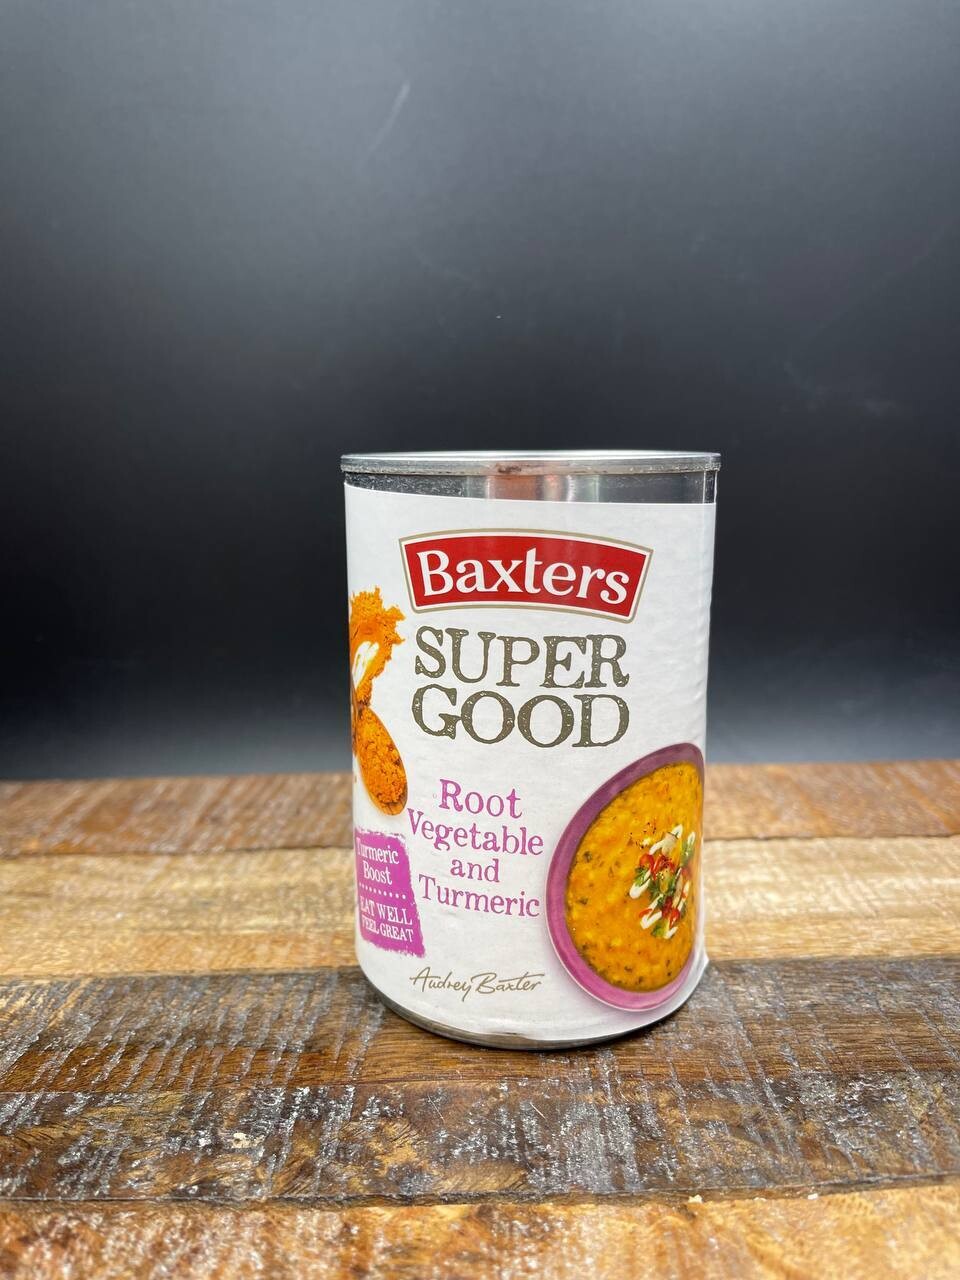 Baxters Super Good Root Vegetable and Turmeric 400g